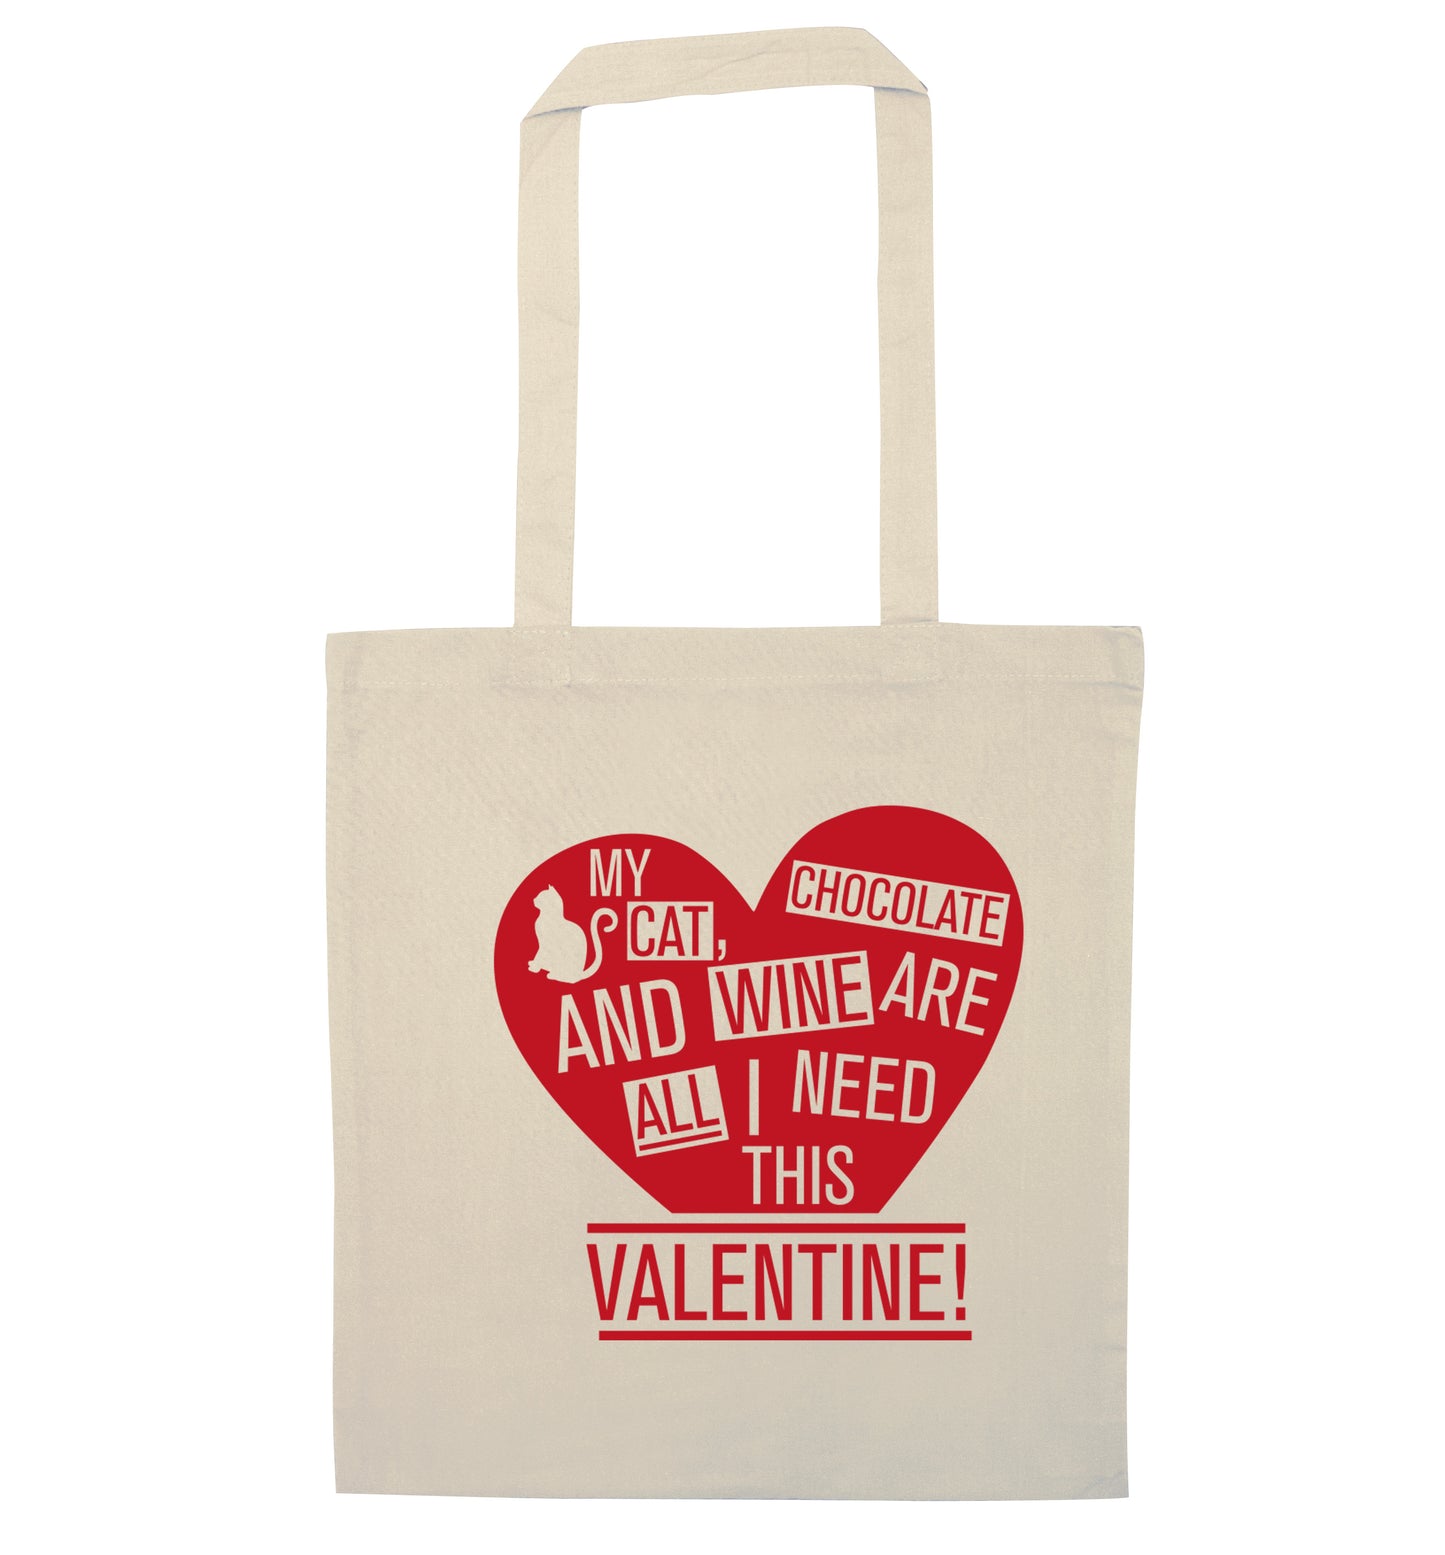 My cat, chocolate and wine are all I need this valentine! natural tote bag